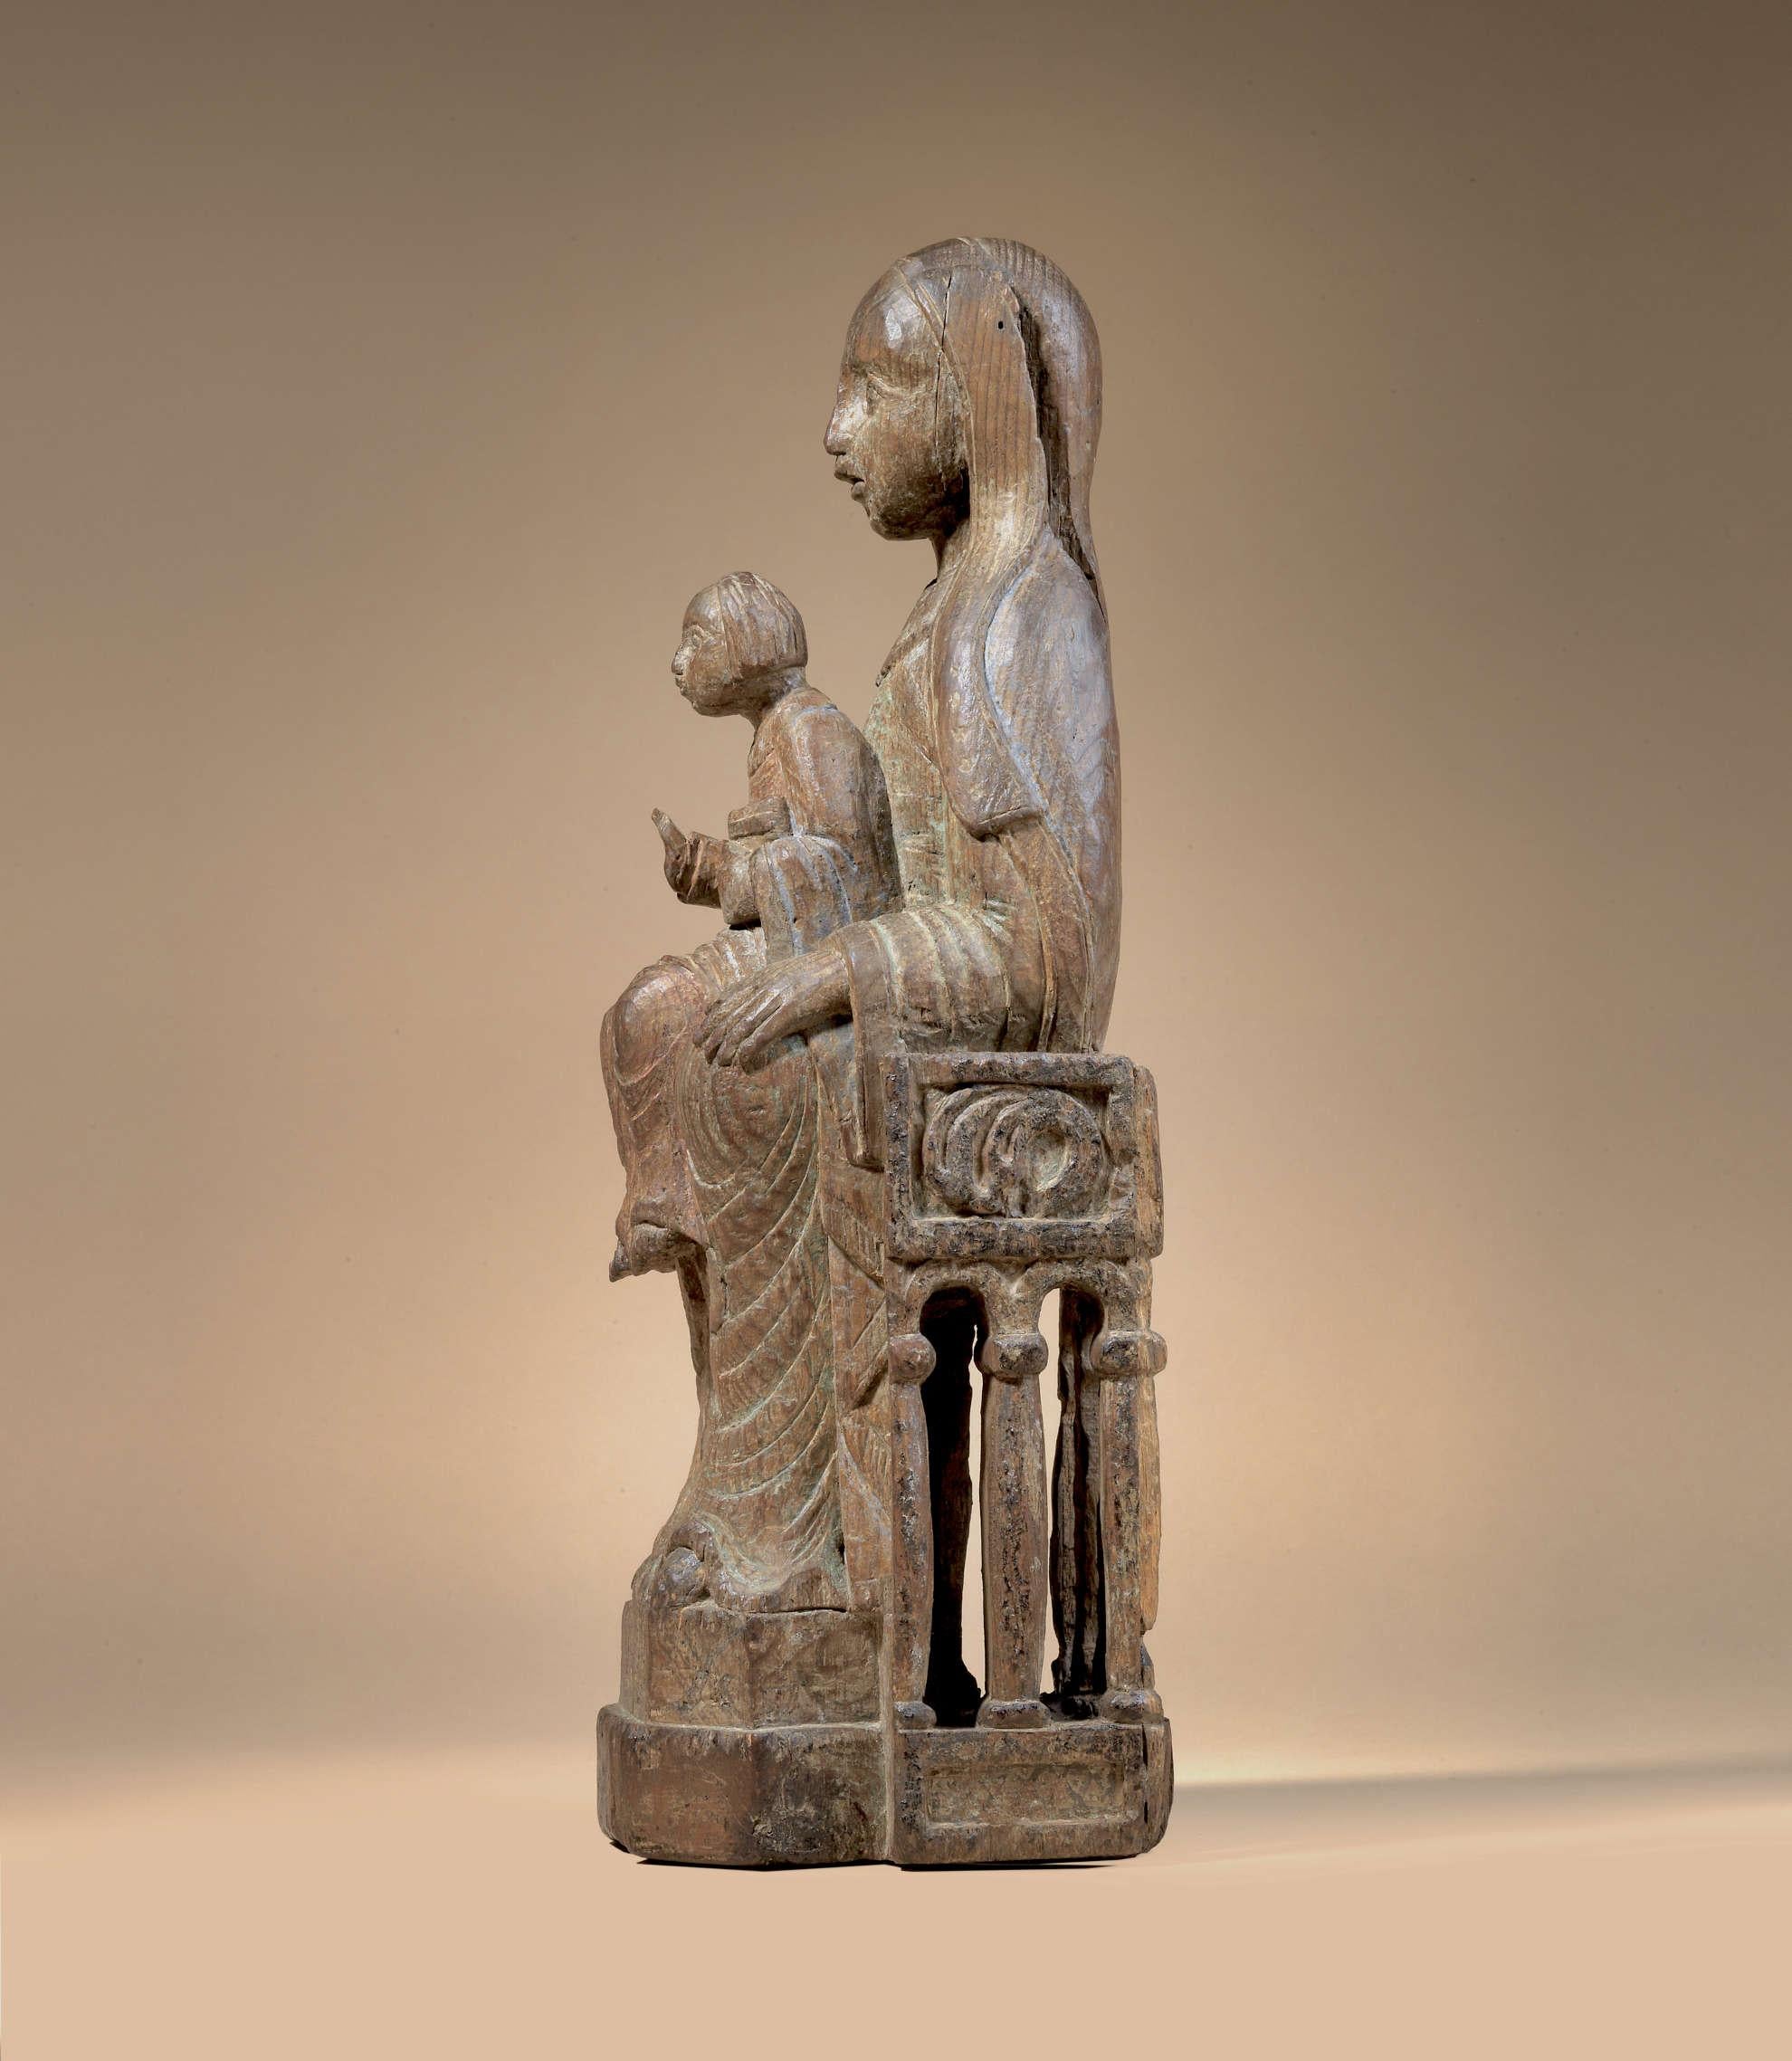 ROMAN MADONNA
“Sedes Sapientiae”
Auvergne
Around 1175/80
Pine wood
Polychrome remains
Height 44 cm

This depiction of the Madonna is a masterfully carved, extremely early figure made of pine or stone pine wood in an exquisite state of preservation.